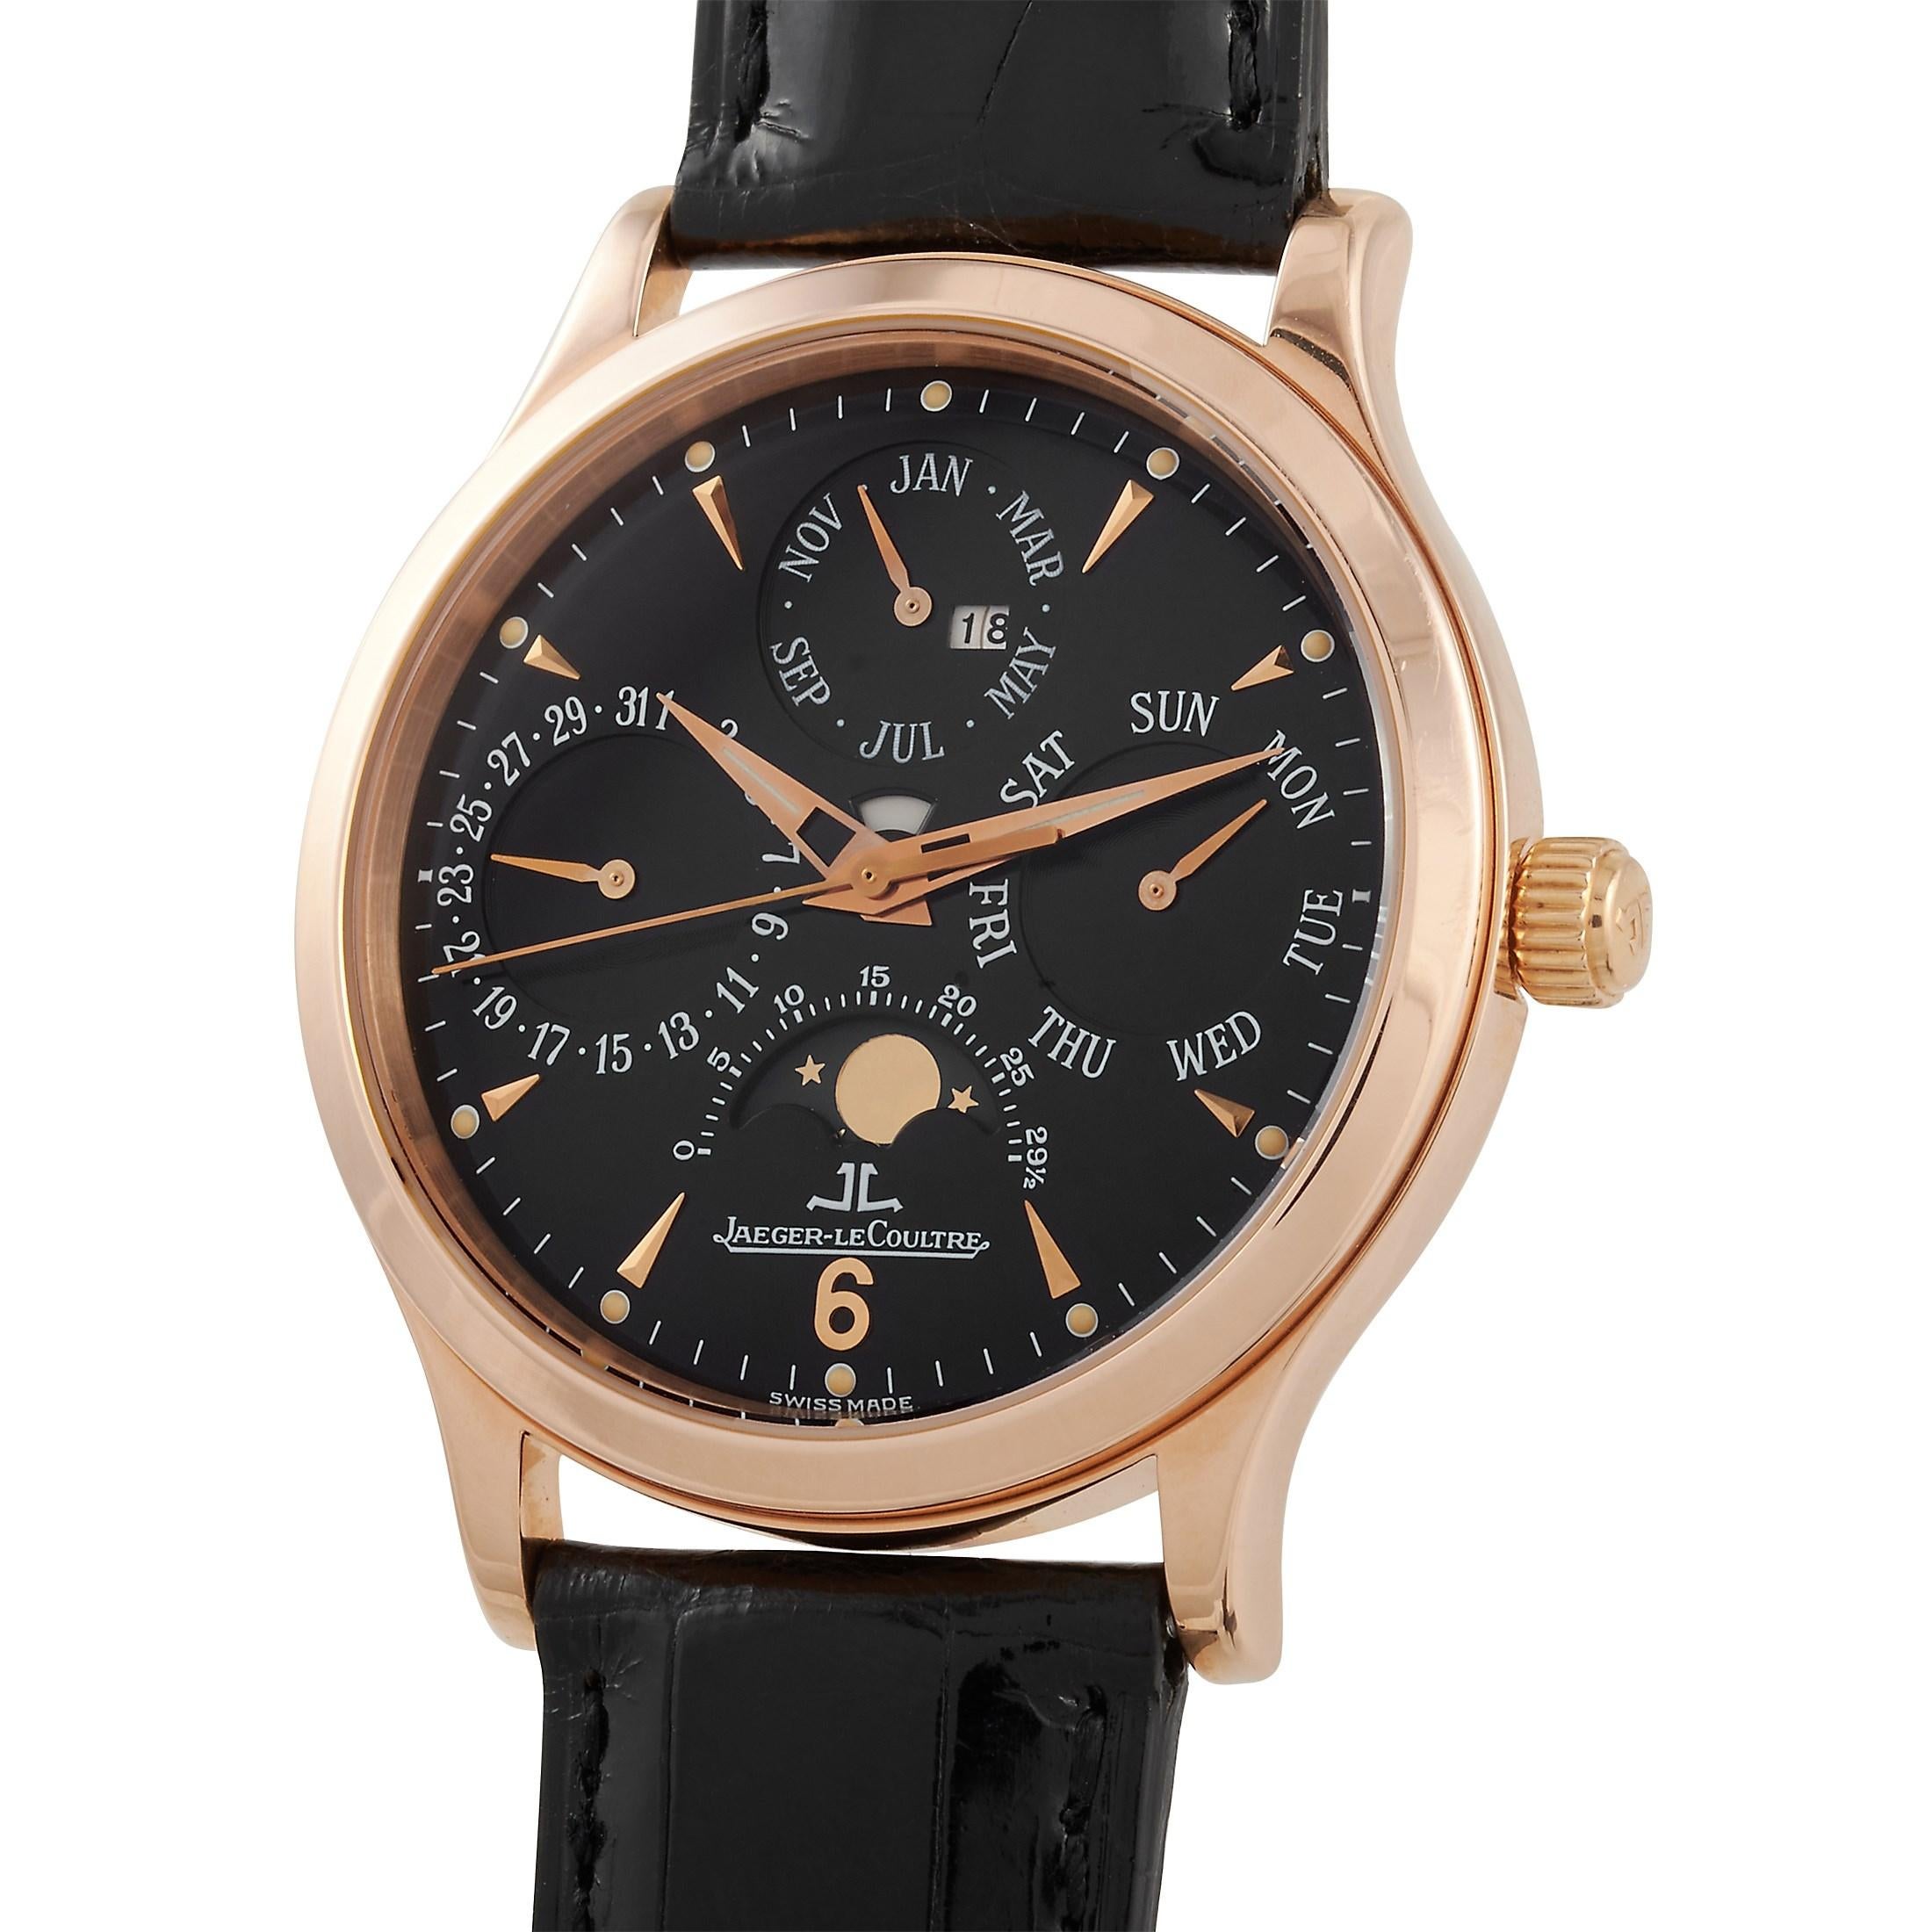 This Jaeger-LeCoultre Master Control Perpetual Calendar Rose Gold Watch, reference number 140.2.80, features an 18K Rose Gold case measuring 37 mm in diameter. It is presented on black leather strap with deployment closure. The transparent case back